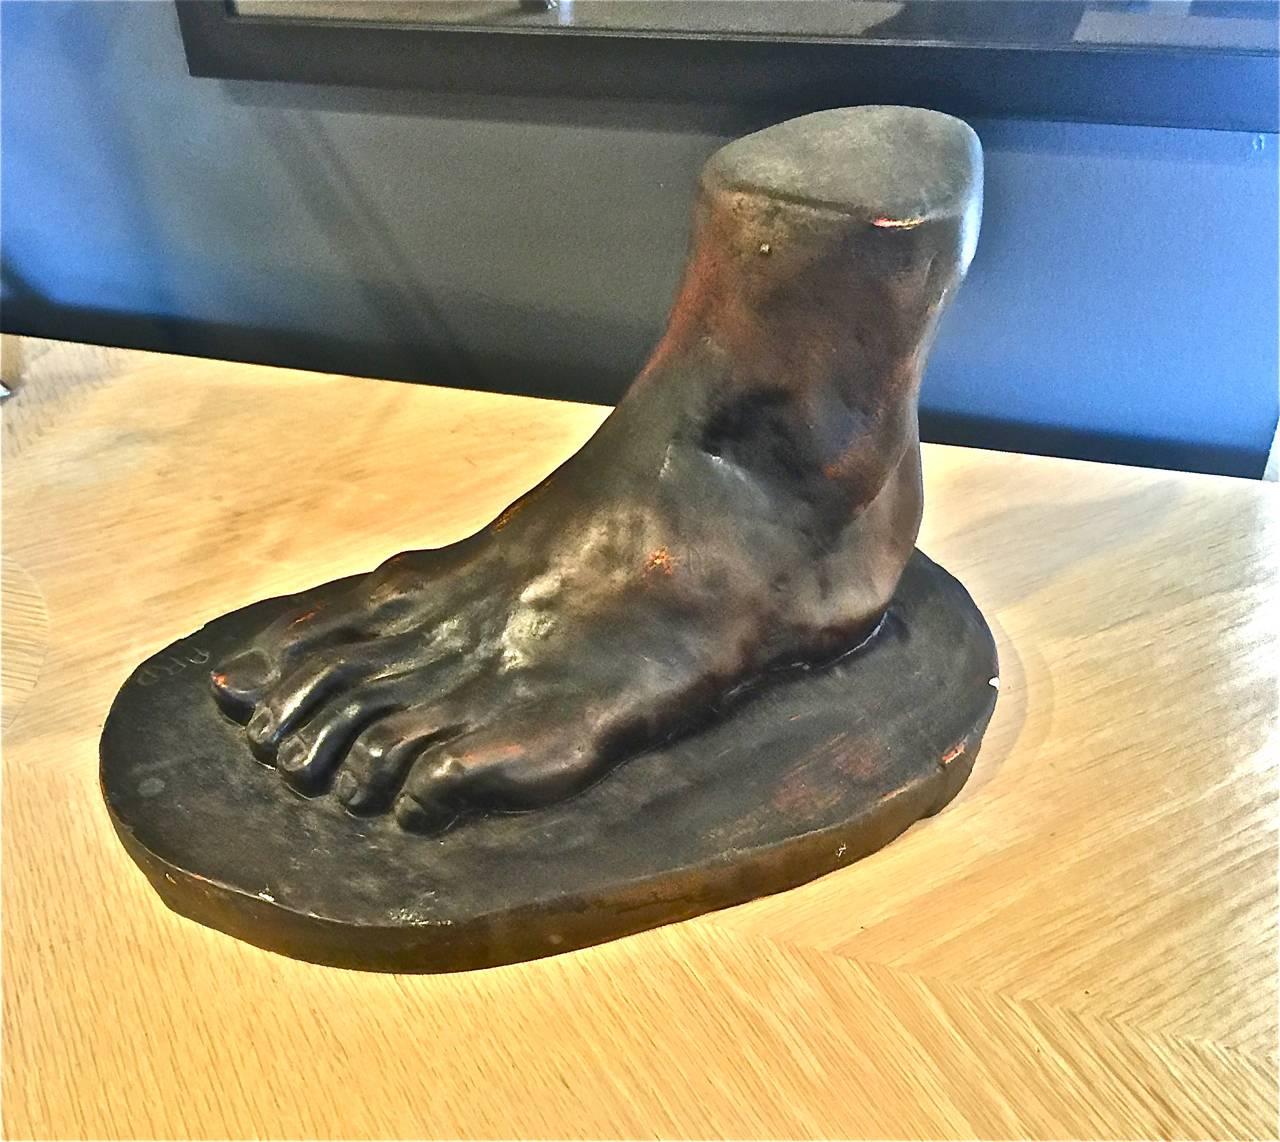 These are early 20th century French plaster castings of male feet in the neoclassical style. One of the feet features a bronzed patina and the second foot is in patinated paint. One of the pieces is signed with initials. Both casting are in overall